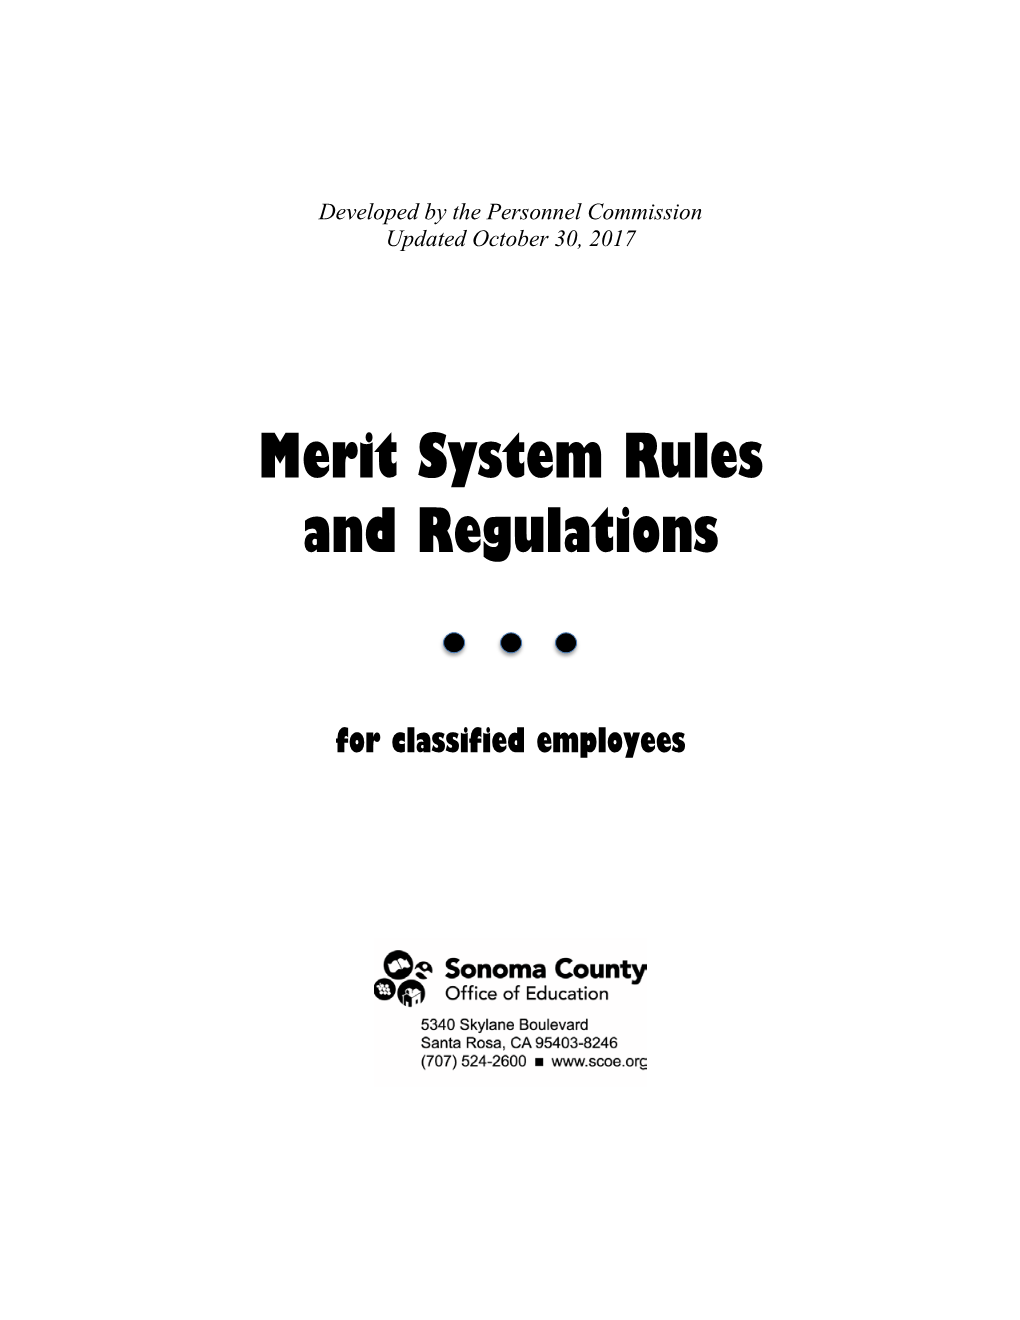 Merit System Rules and Regulations